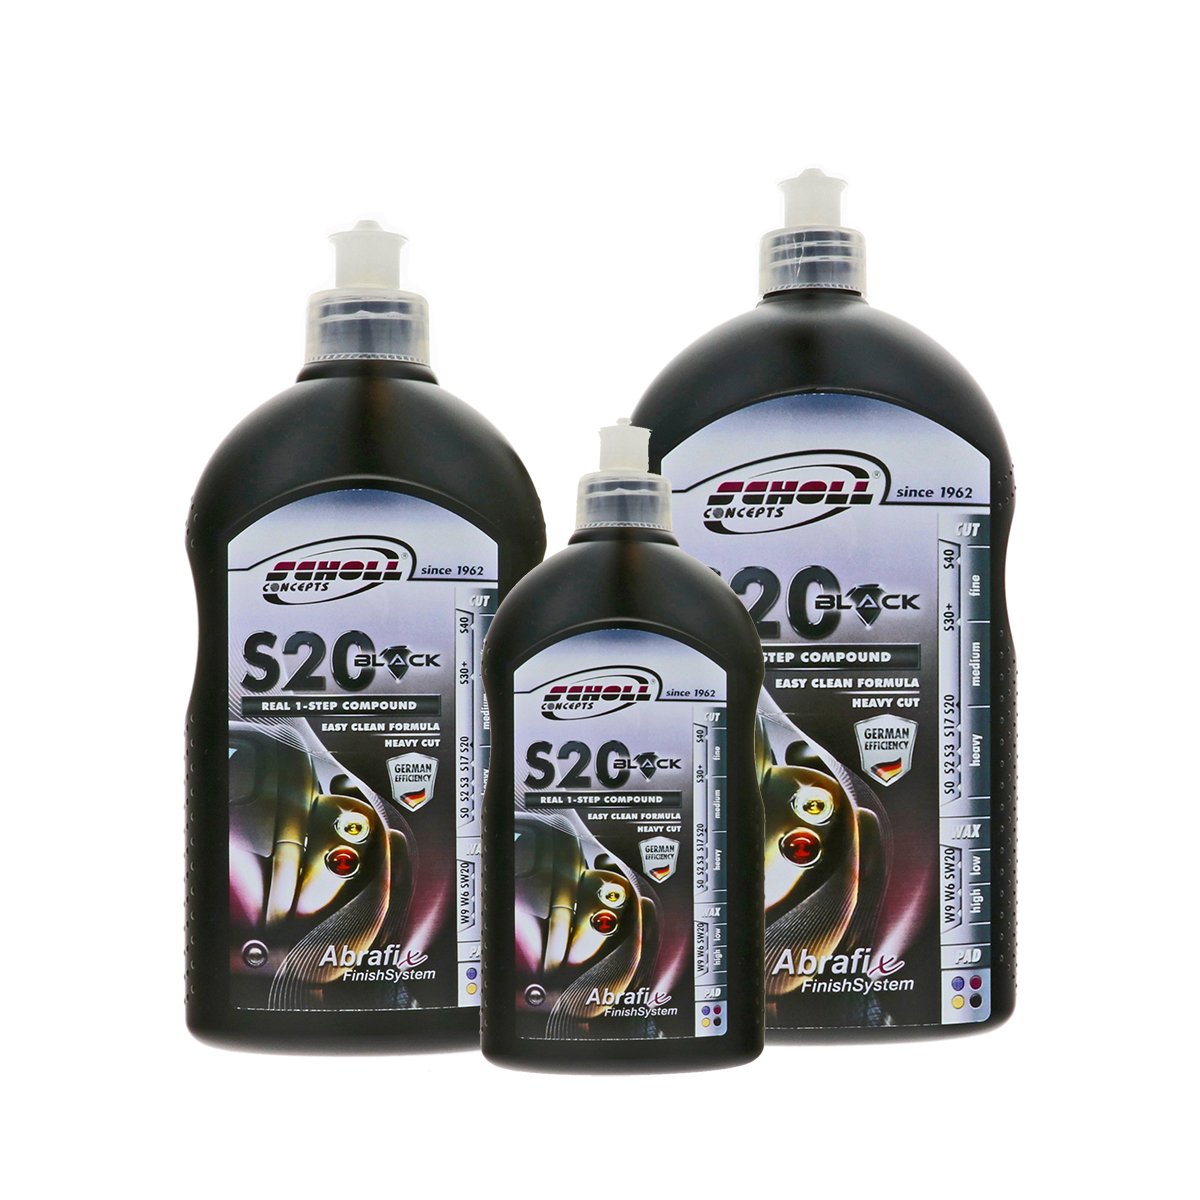 S20 Black Real 1-Step Compound